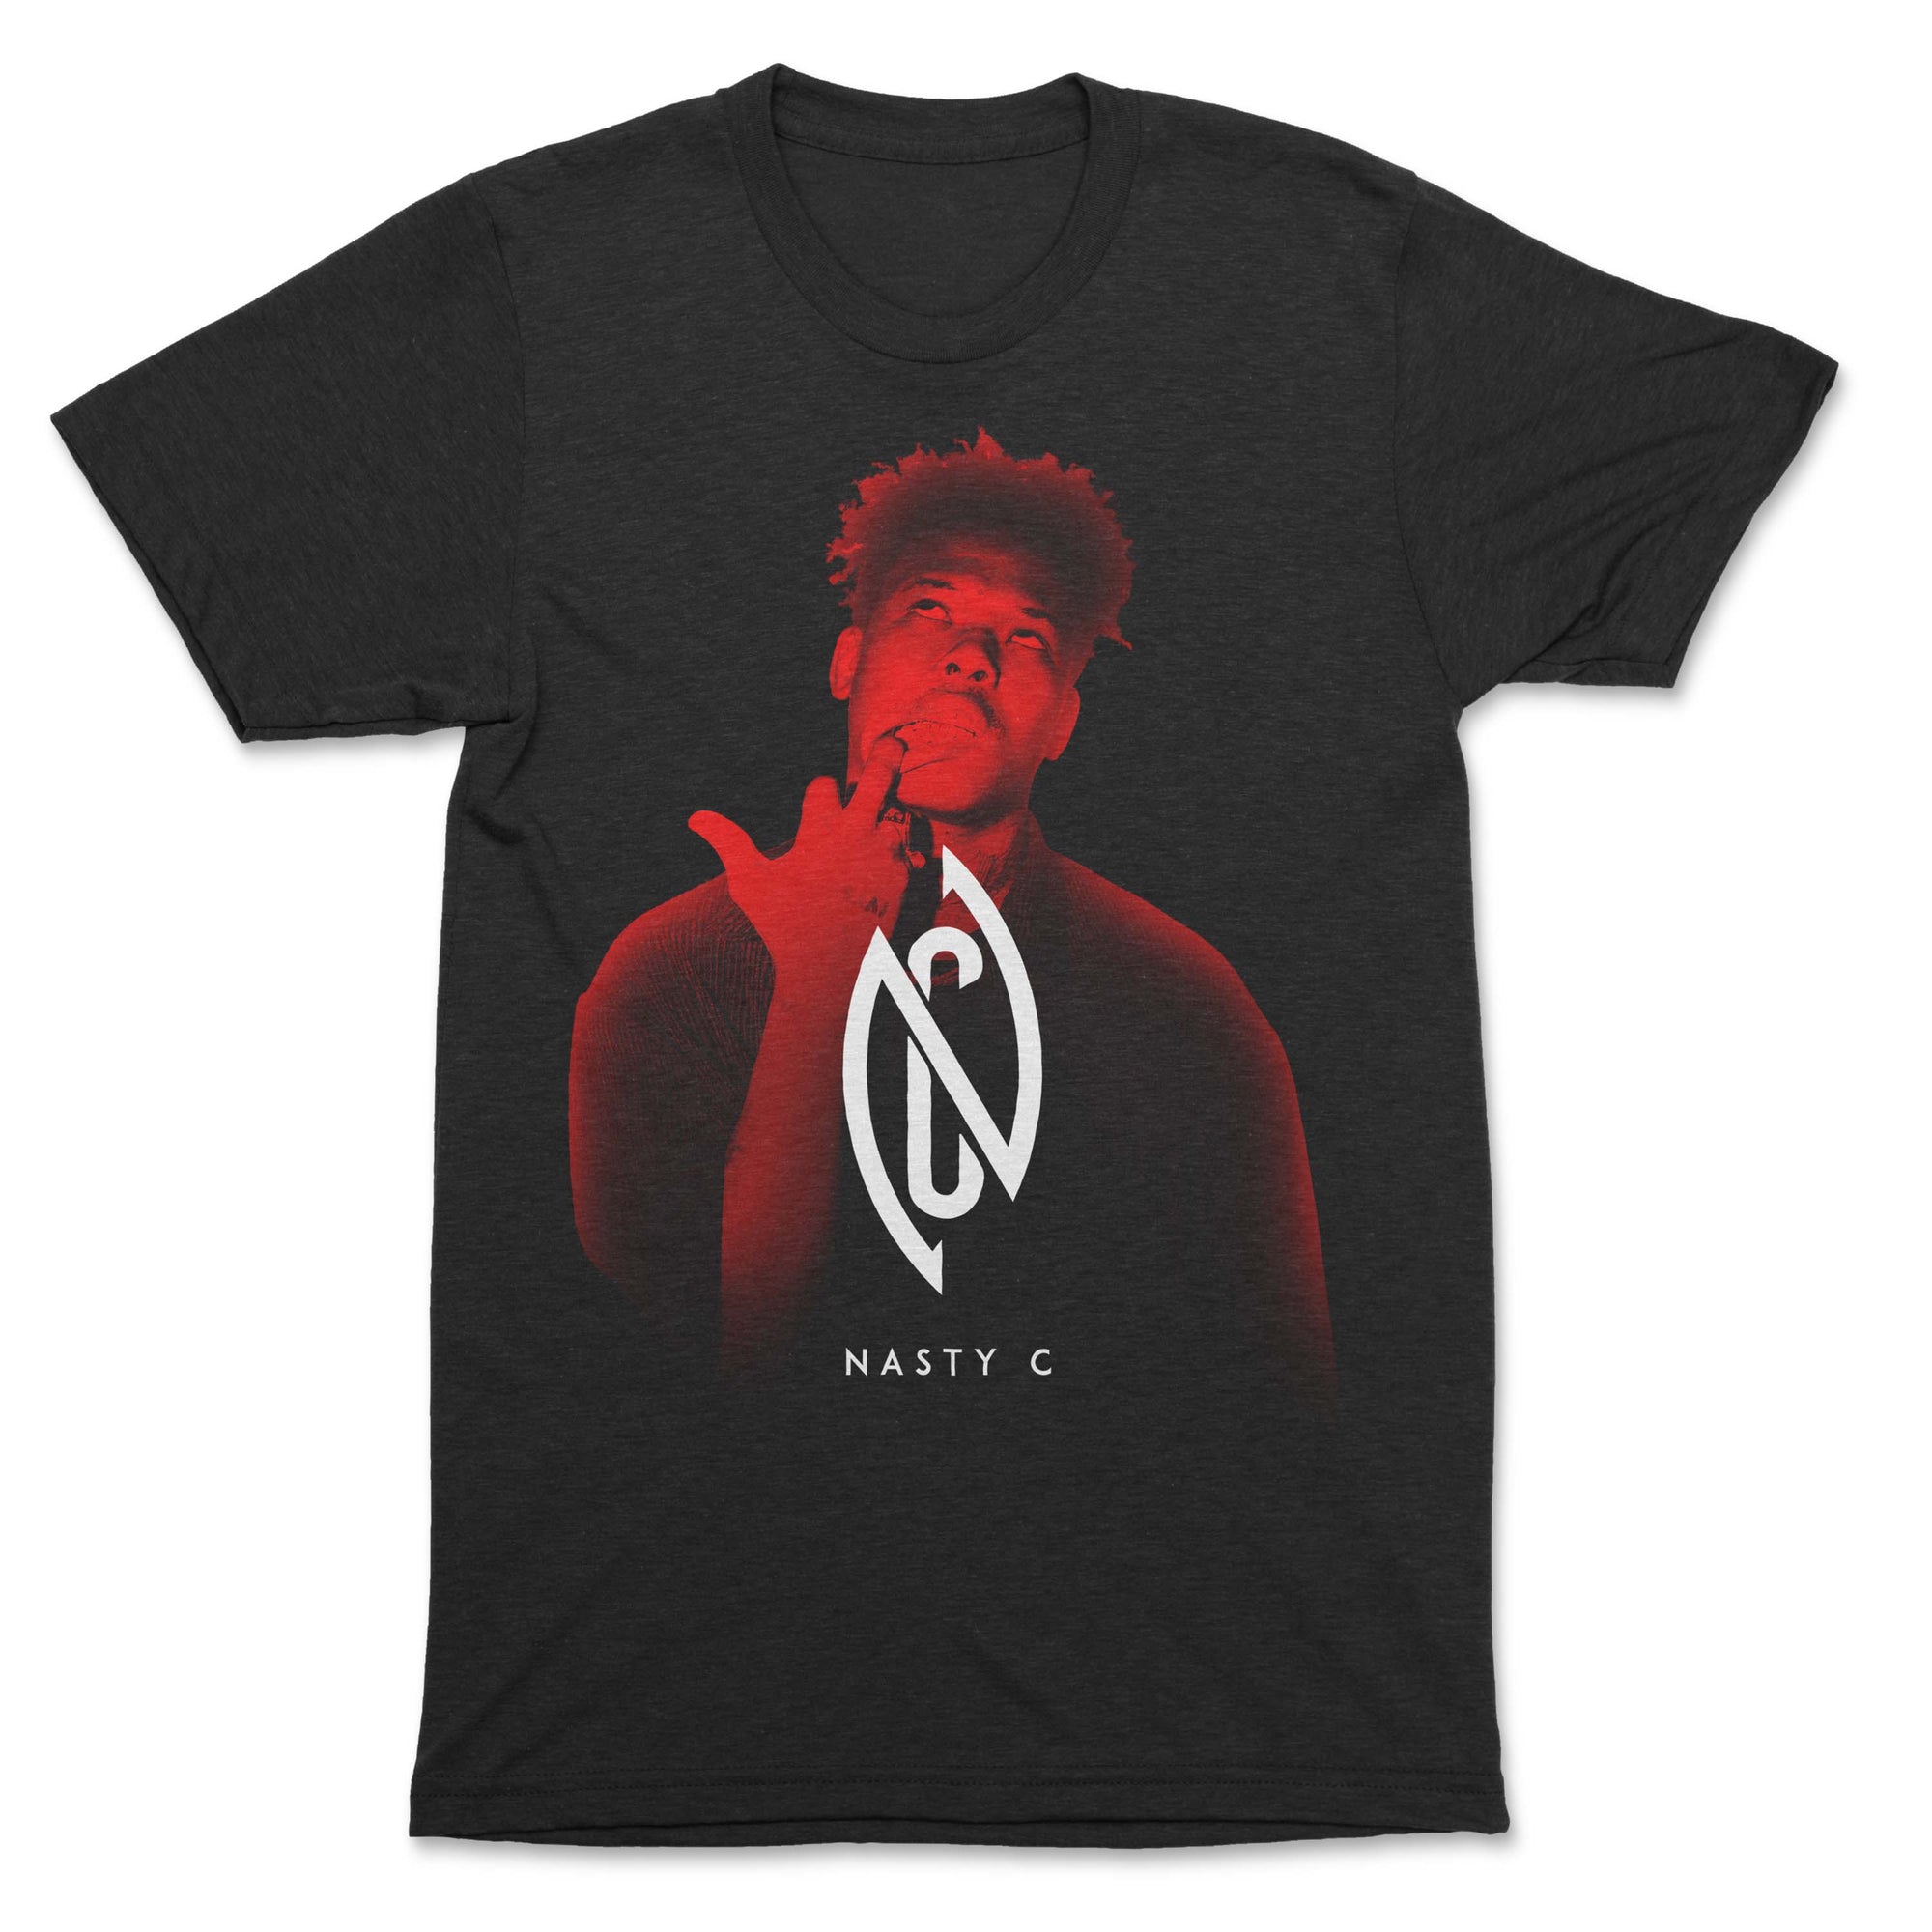 Nasty C - Red Hooked Black T-Shirt - OnlyArtistsOfficial